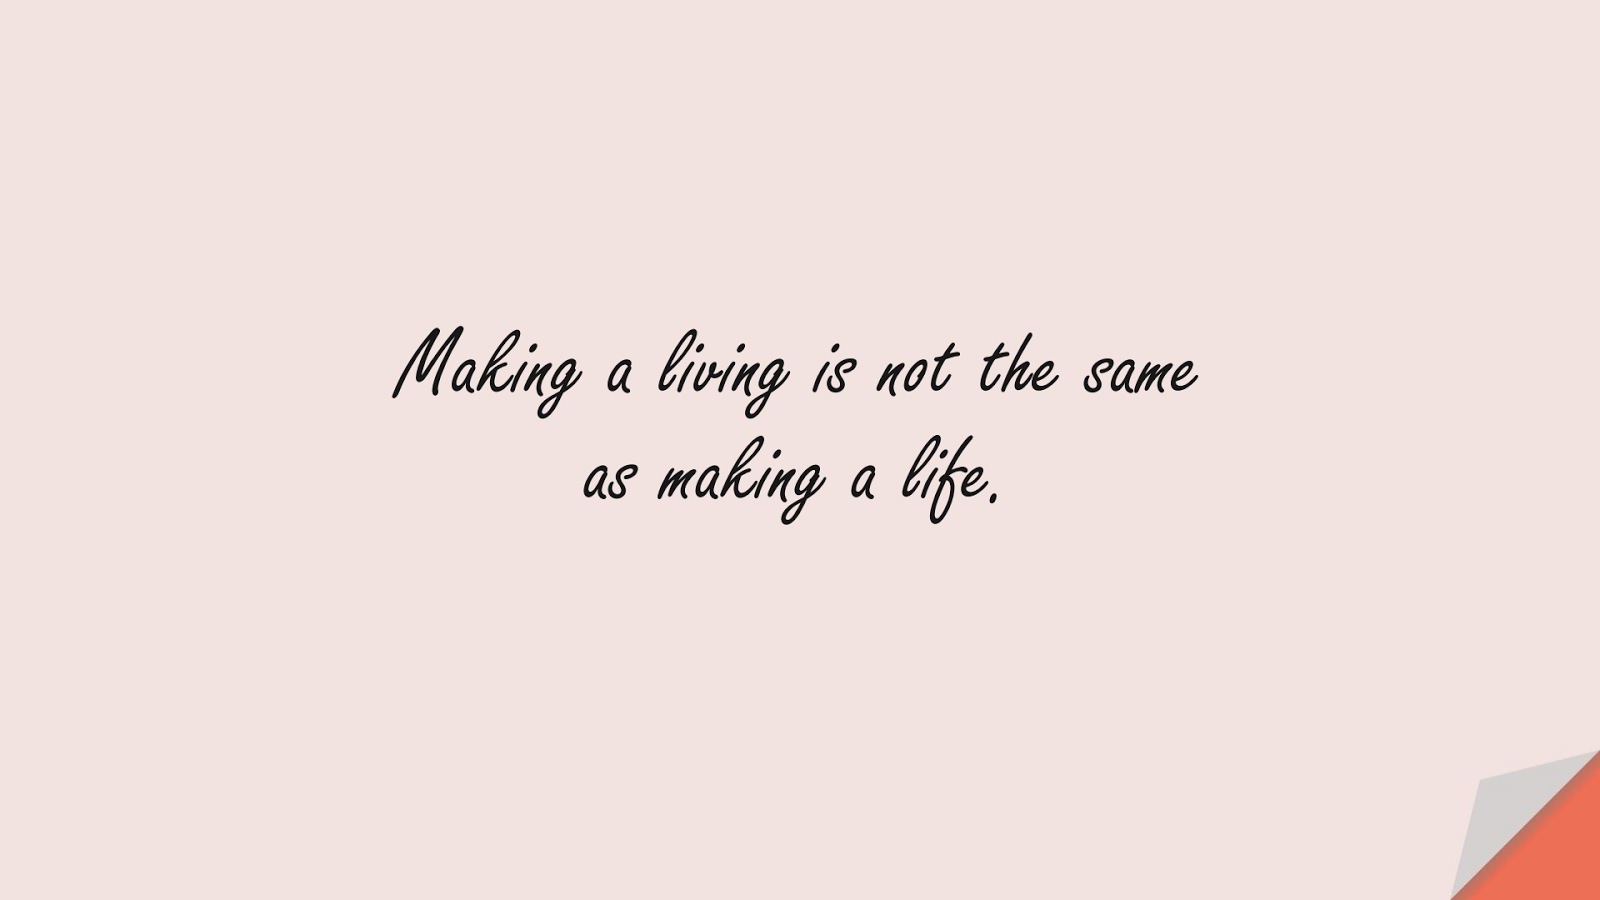 Making a living is not the same as making a life.FALSE